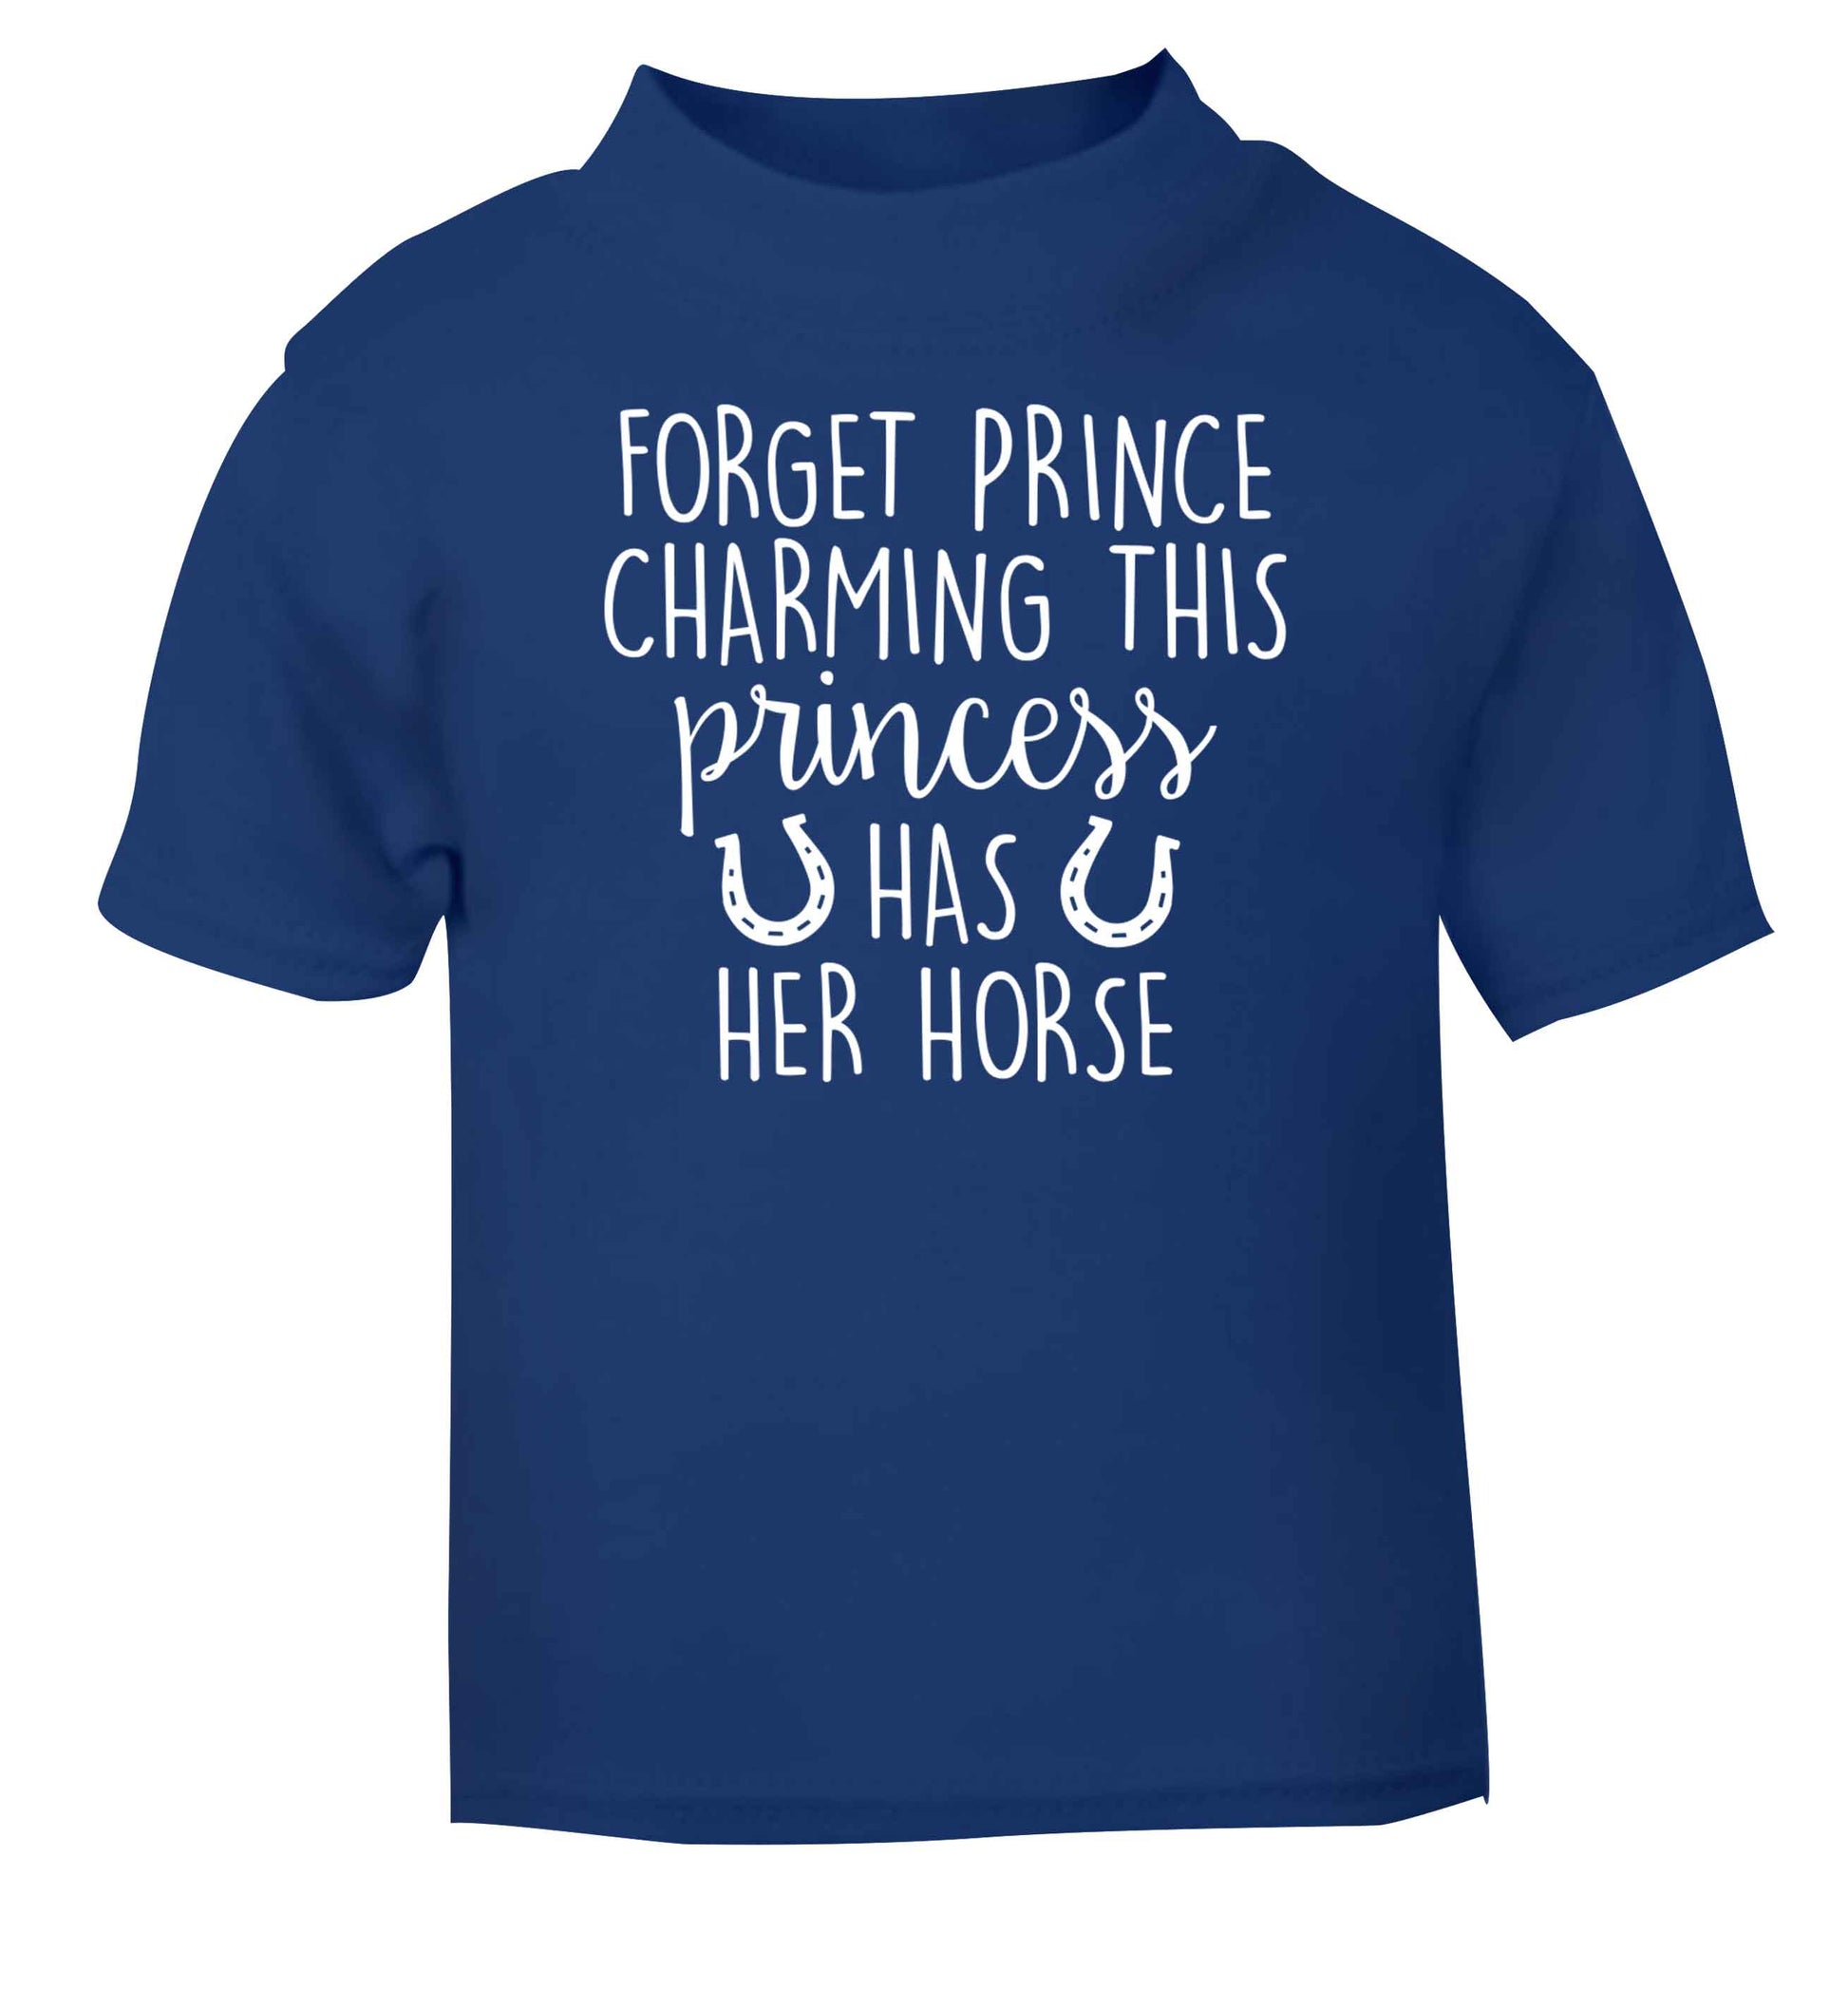 Forget prince charming this princess has her horse blue baby toddler Tshirt 2 Years